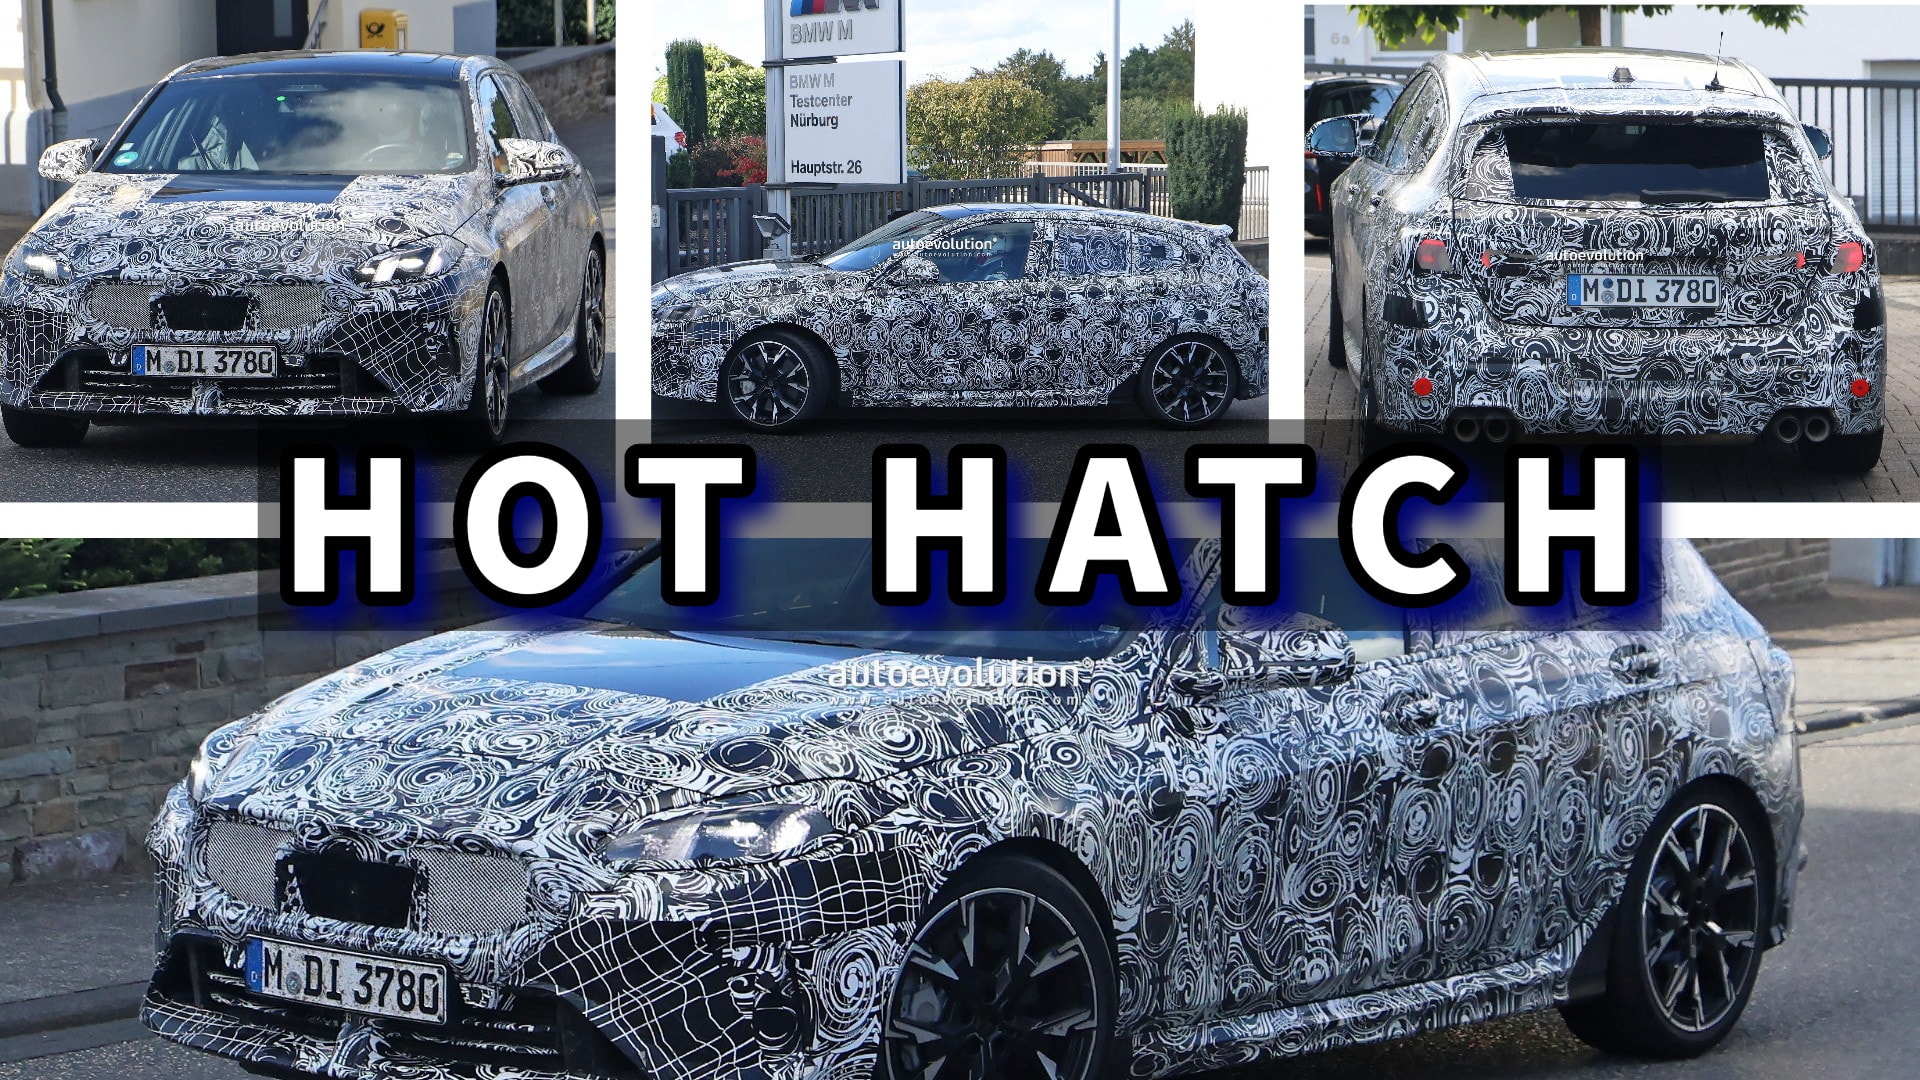 Upcoming BMW 1 Series F40 Hatchback spotted again